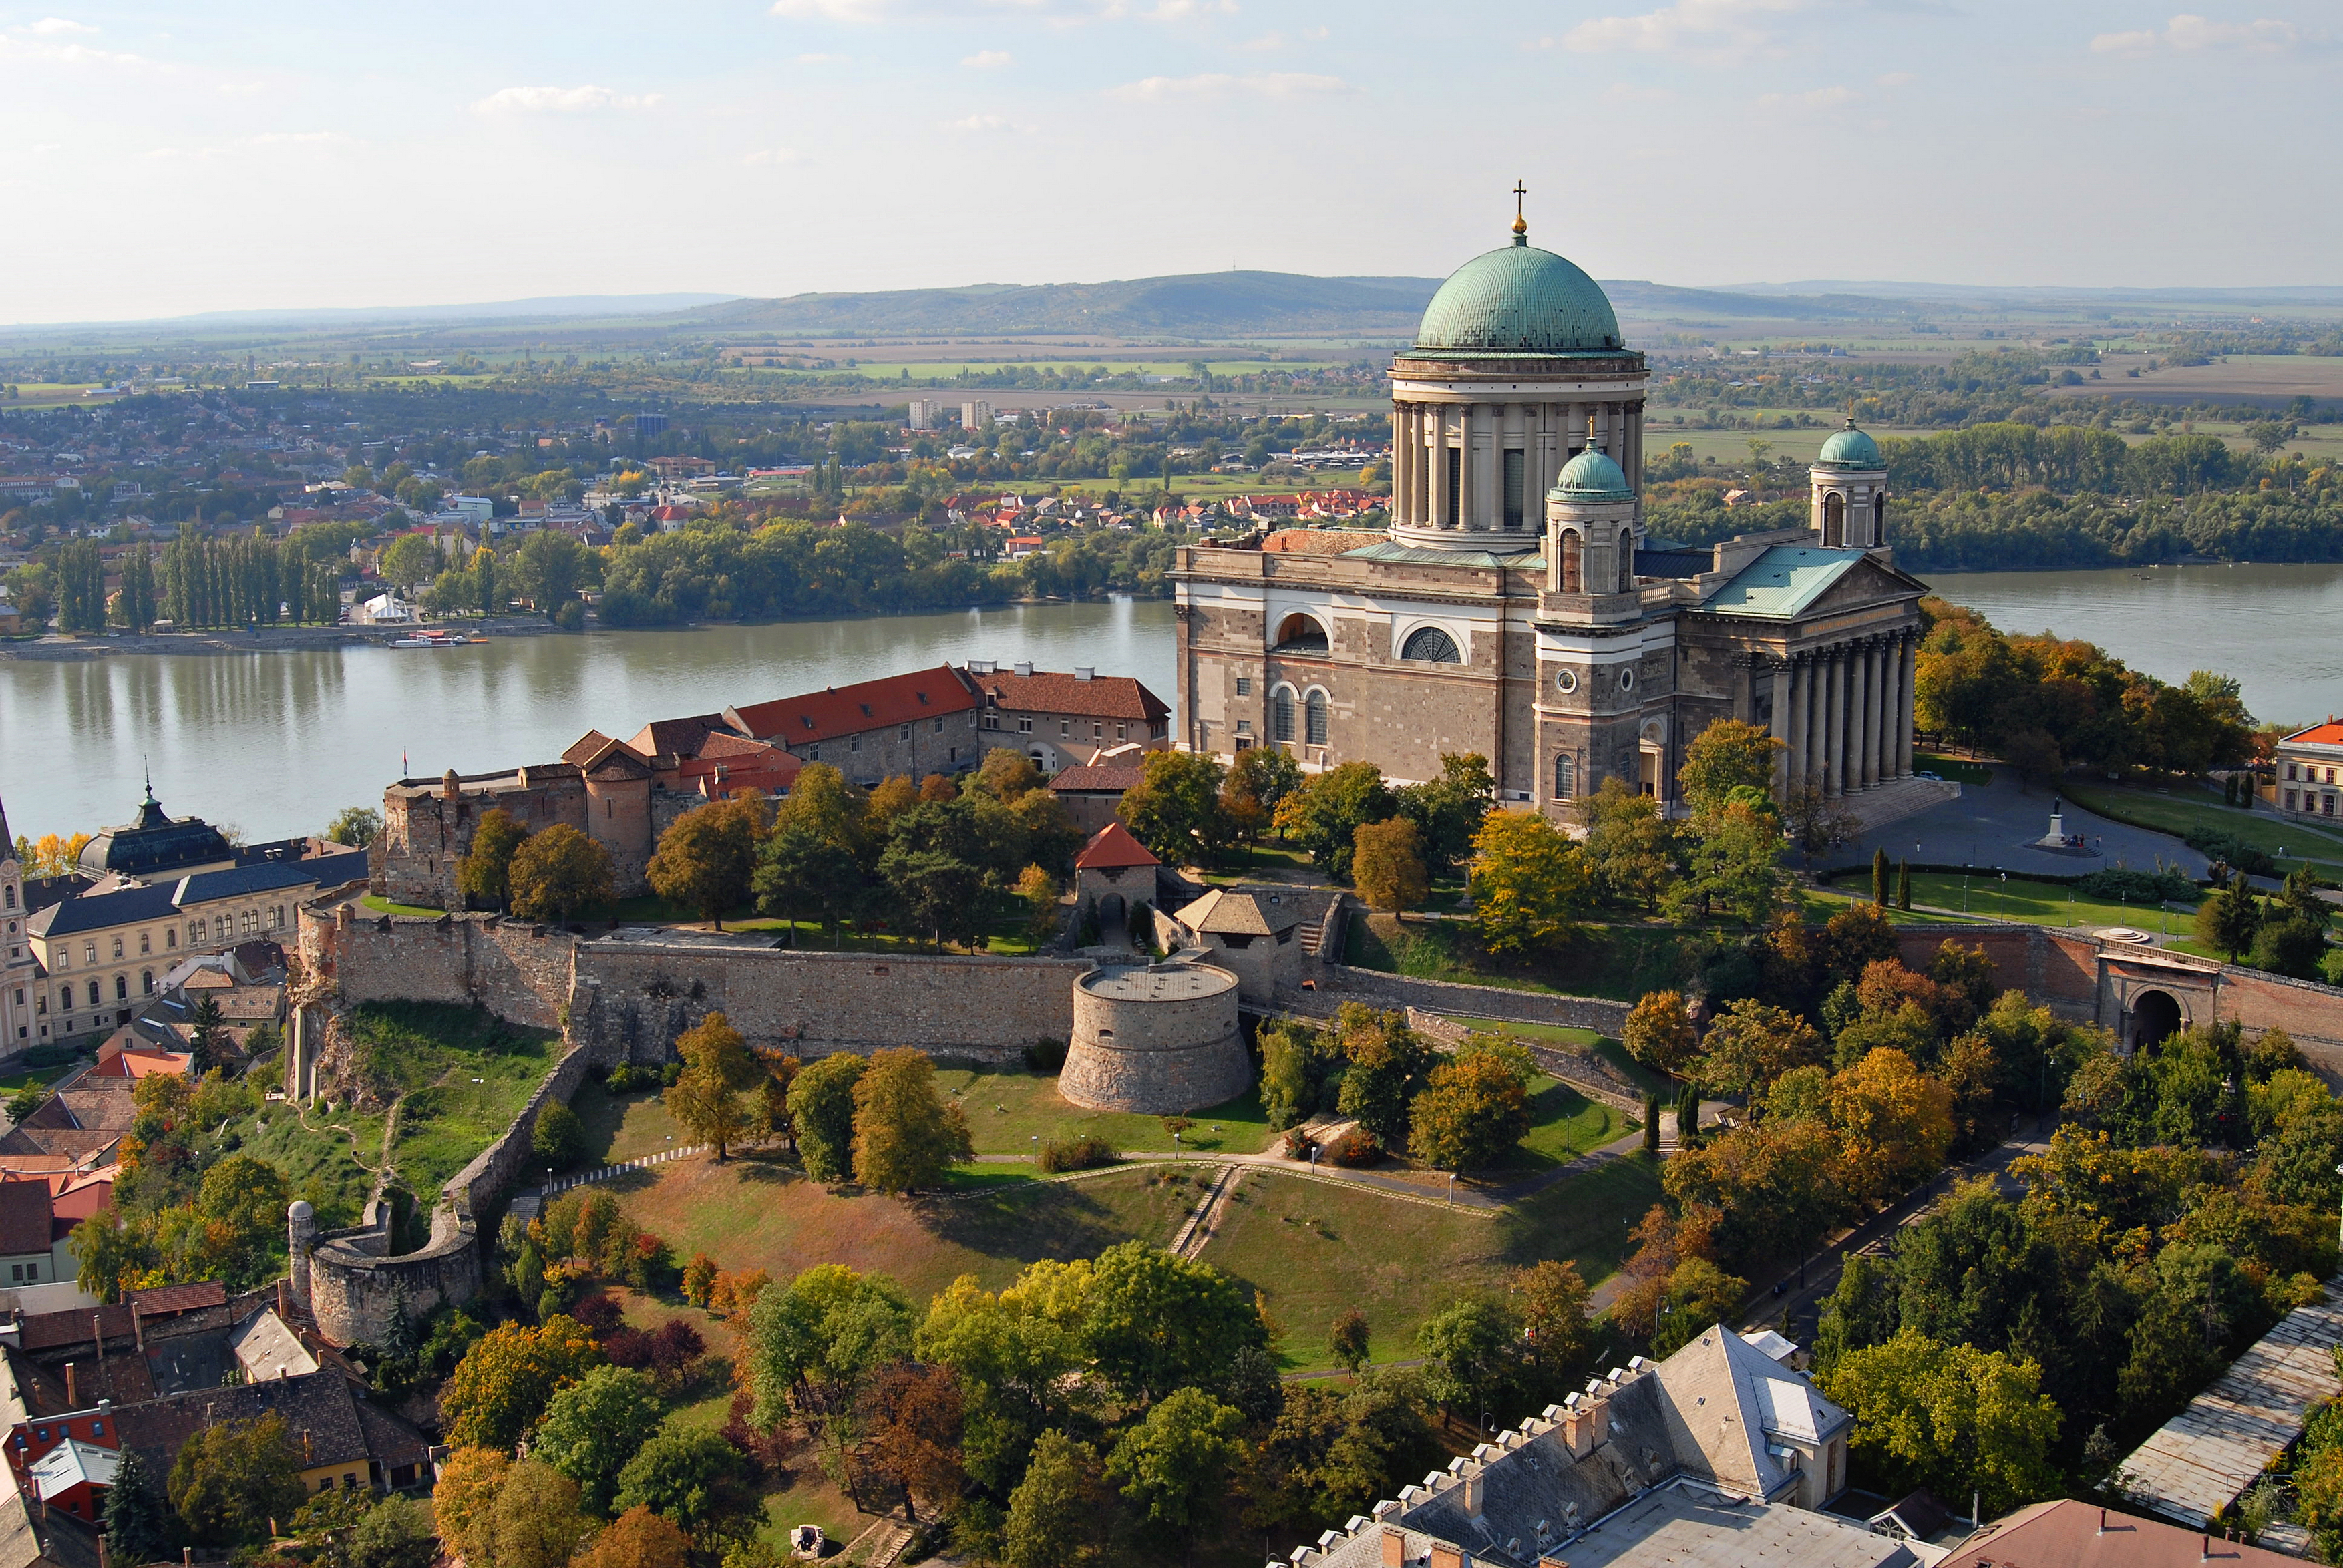 Summer School students visited the historical town of Esztergom